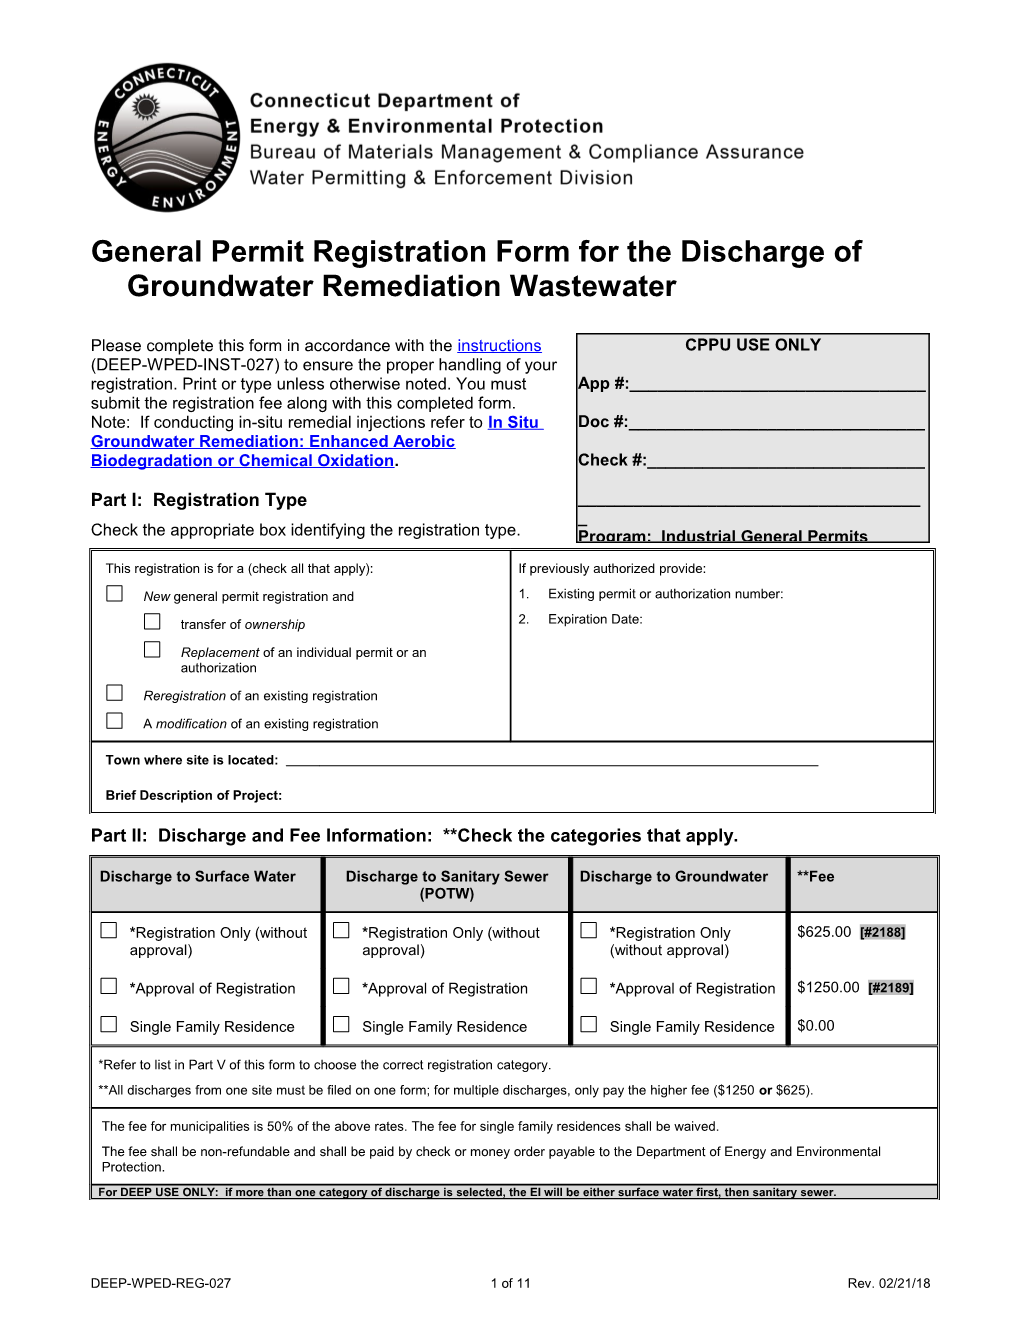 General Permit Registration Form to Discharge Groundwater Remediation Wastewater